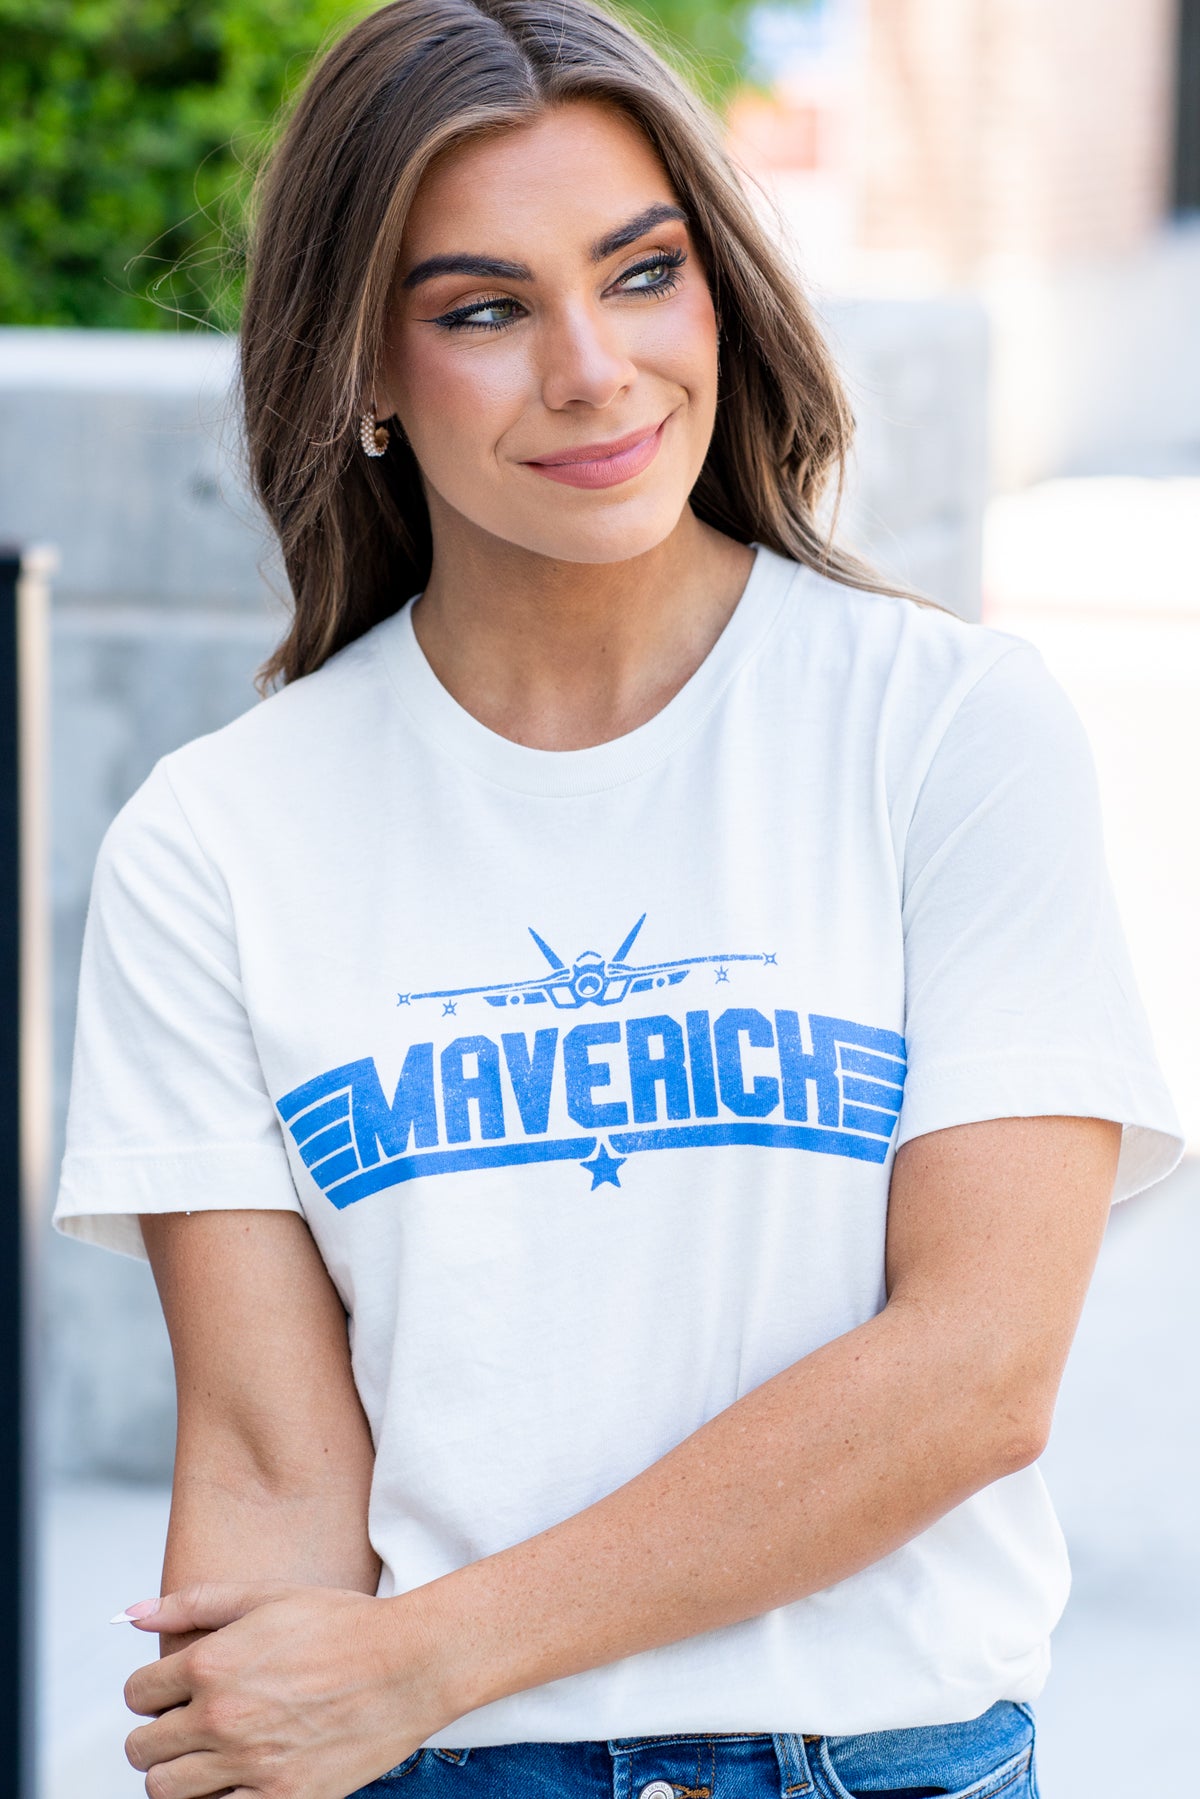 Maverick by Oat Collective   Graphic Tee   Color: Vintage White Neckline: Round   Sleeve: Short Sleeve  Fitted Tee 100% Premium Airlume combed cotton Style #: OT2206X777 Contact us for any additional measurements or sizing.    